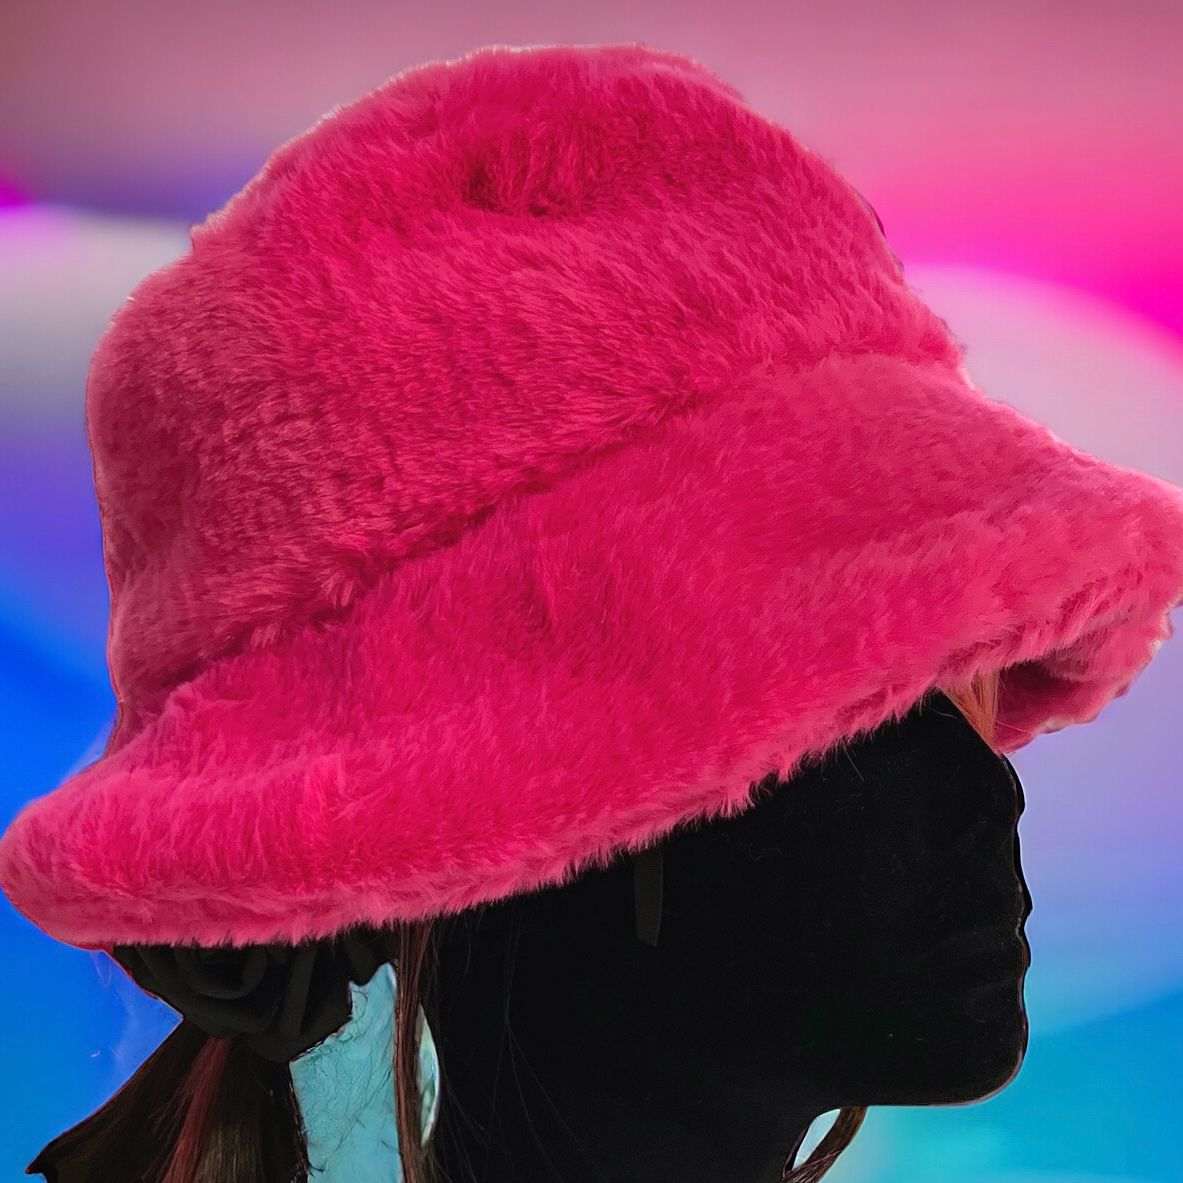 Sassy "That's Hot" Pink Furry Festival Bucket Hat – a vibrant accessory for making a bold fashion statement at any event! Displayed on a mannequin.